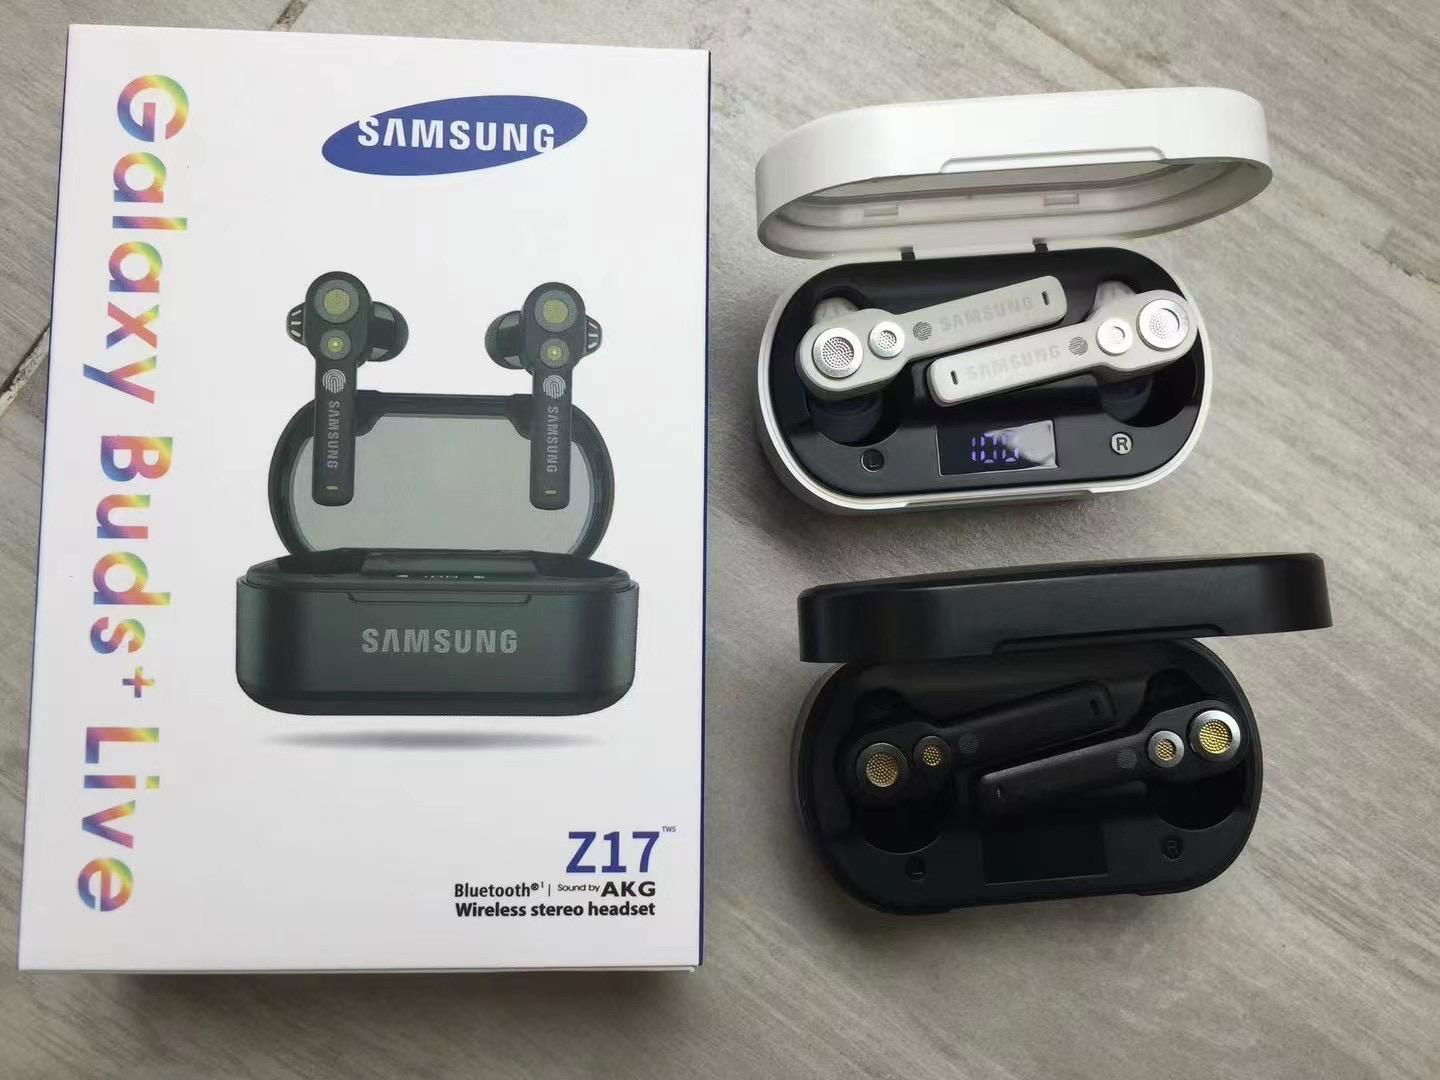 Samsung Galaxy Buds + Live Z17 Earbuds Wireless Bluetooth Noise Reduction